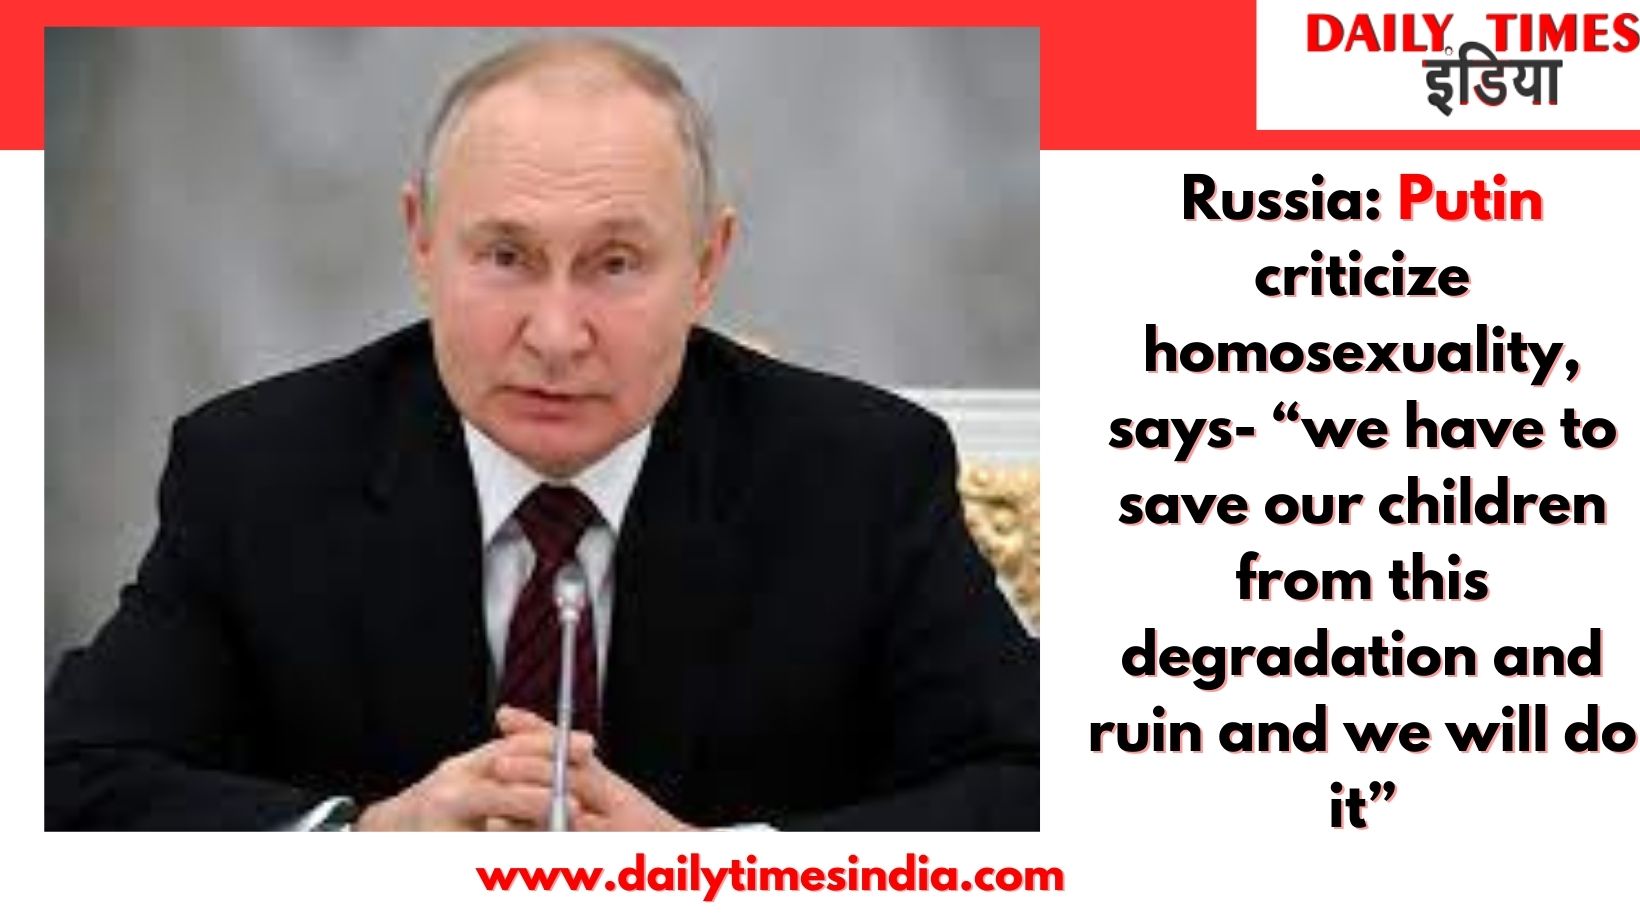 Russia: Putin criticize homosexuality, says- “we have to save our children from this degradation and ruin and we will do it”